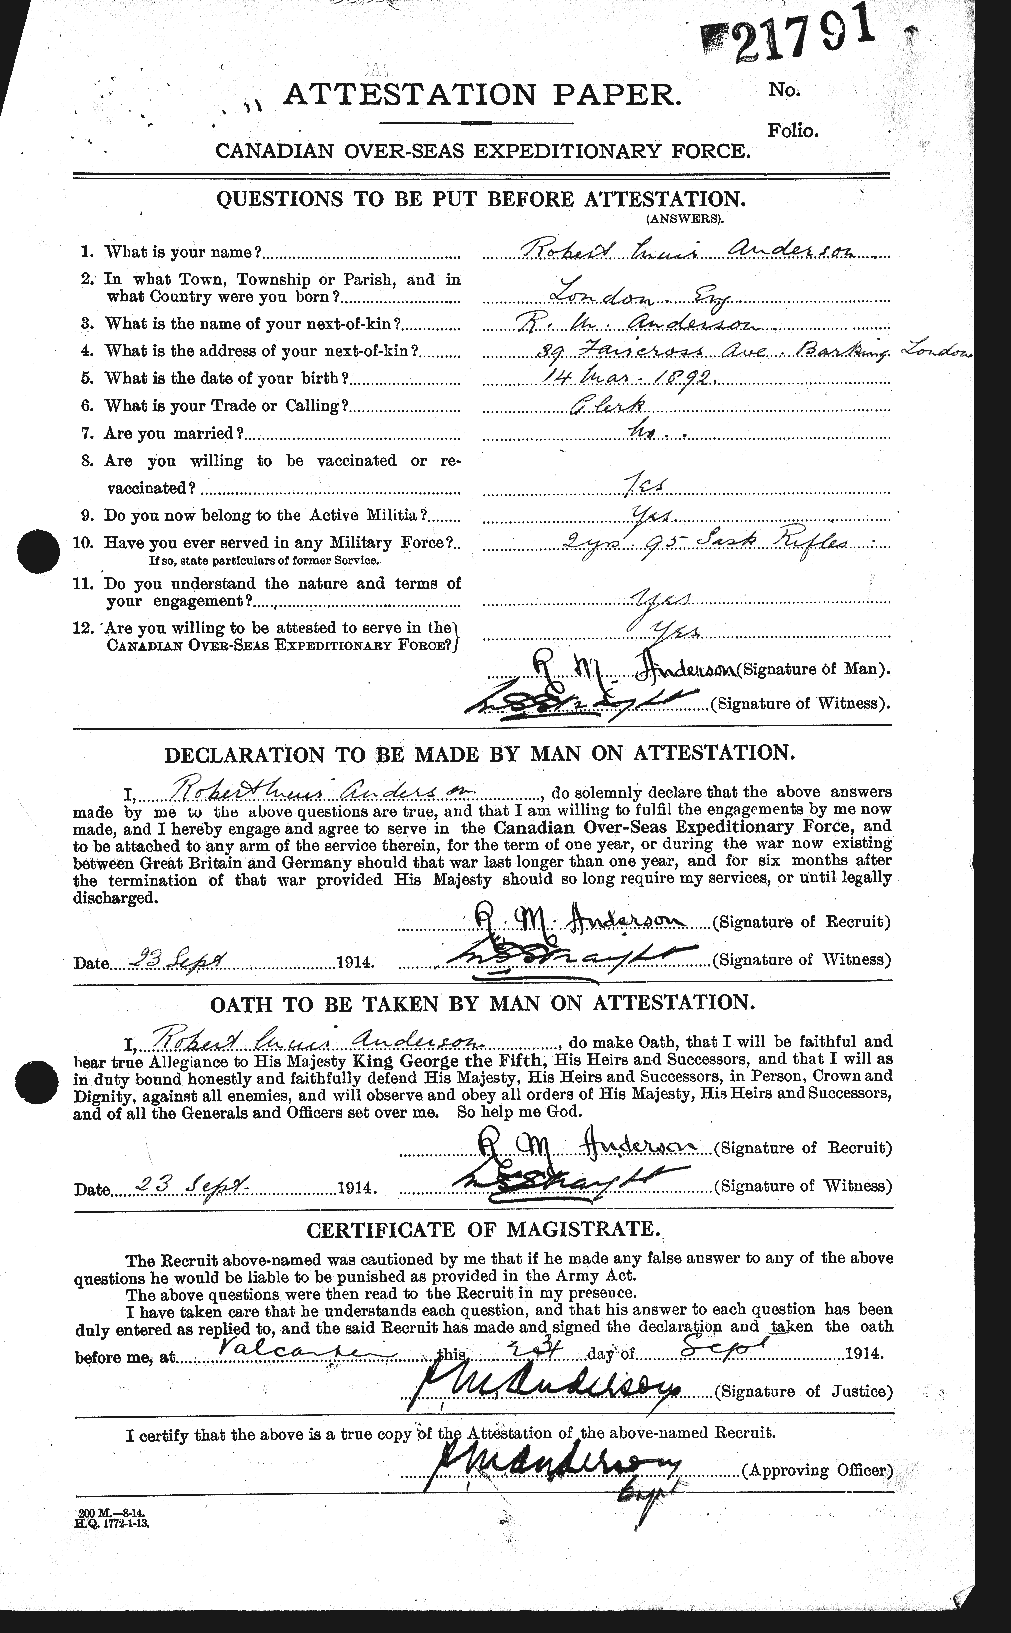 Personnel Records of the First World War - CEF 207233a